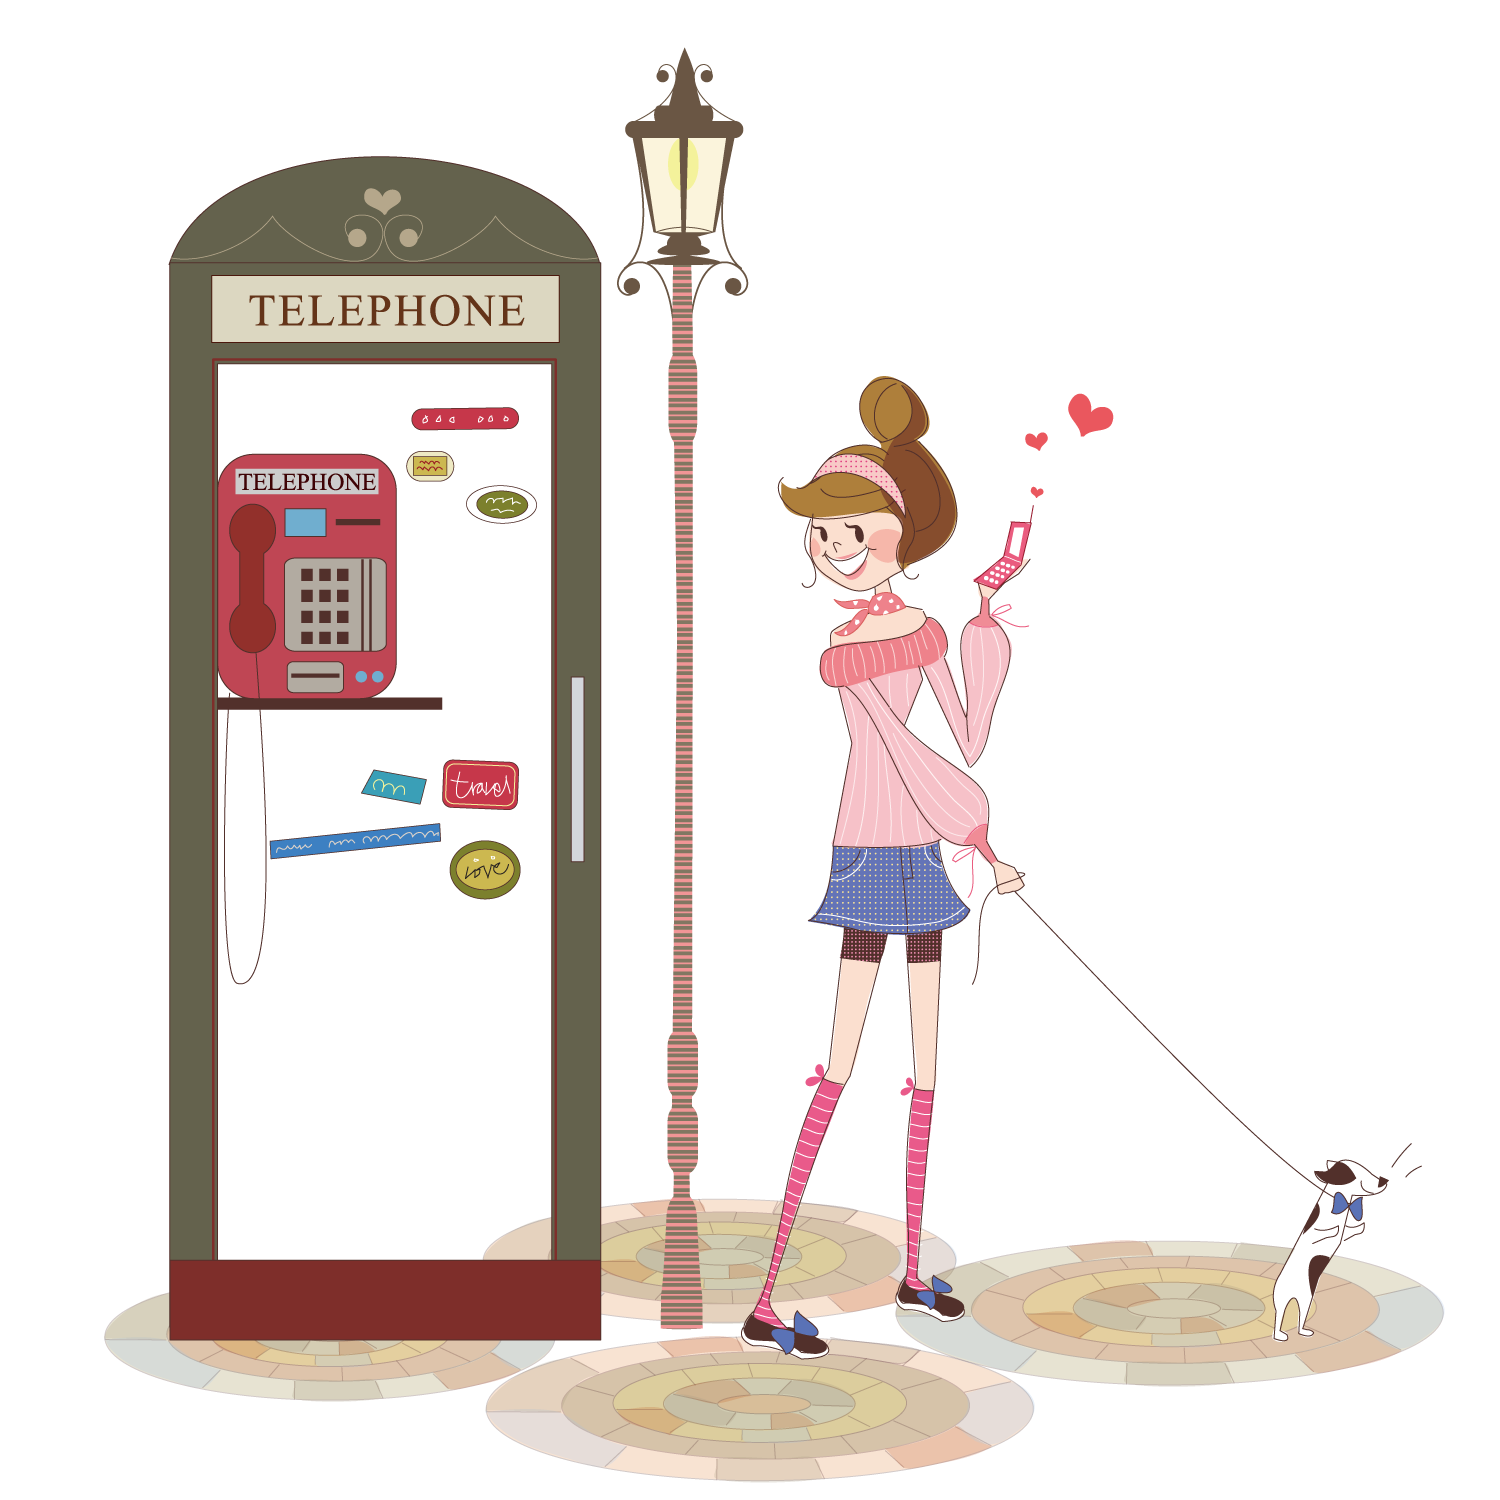 Telephone Booth Free PNG Image